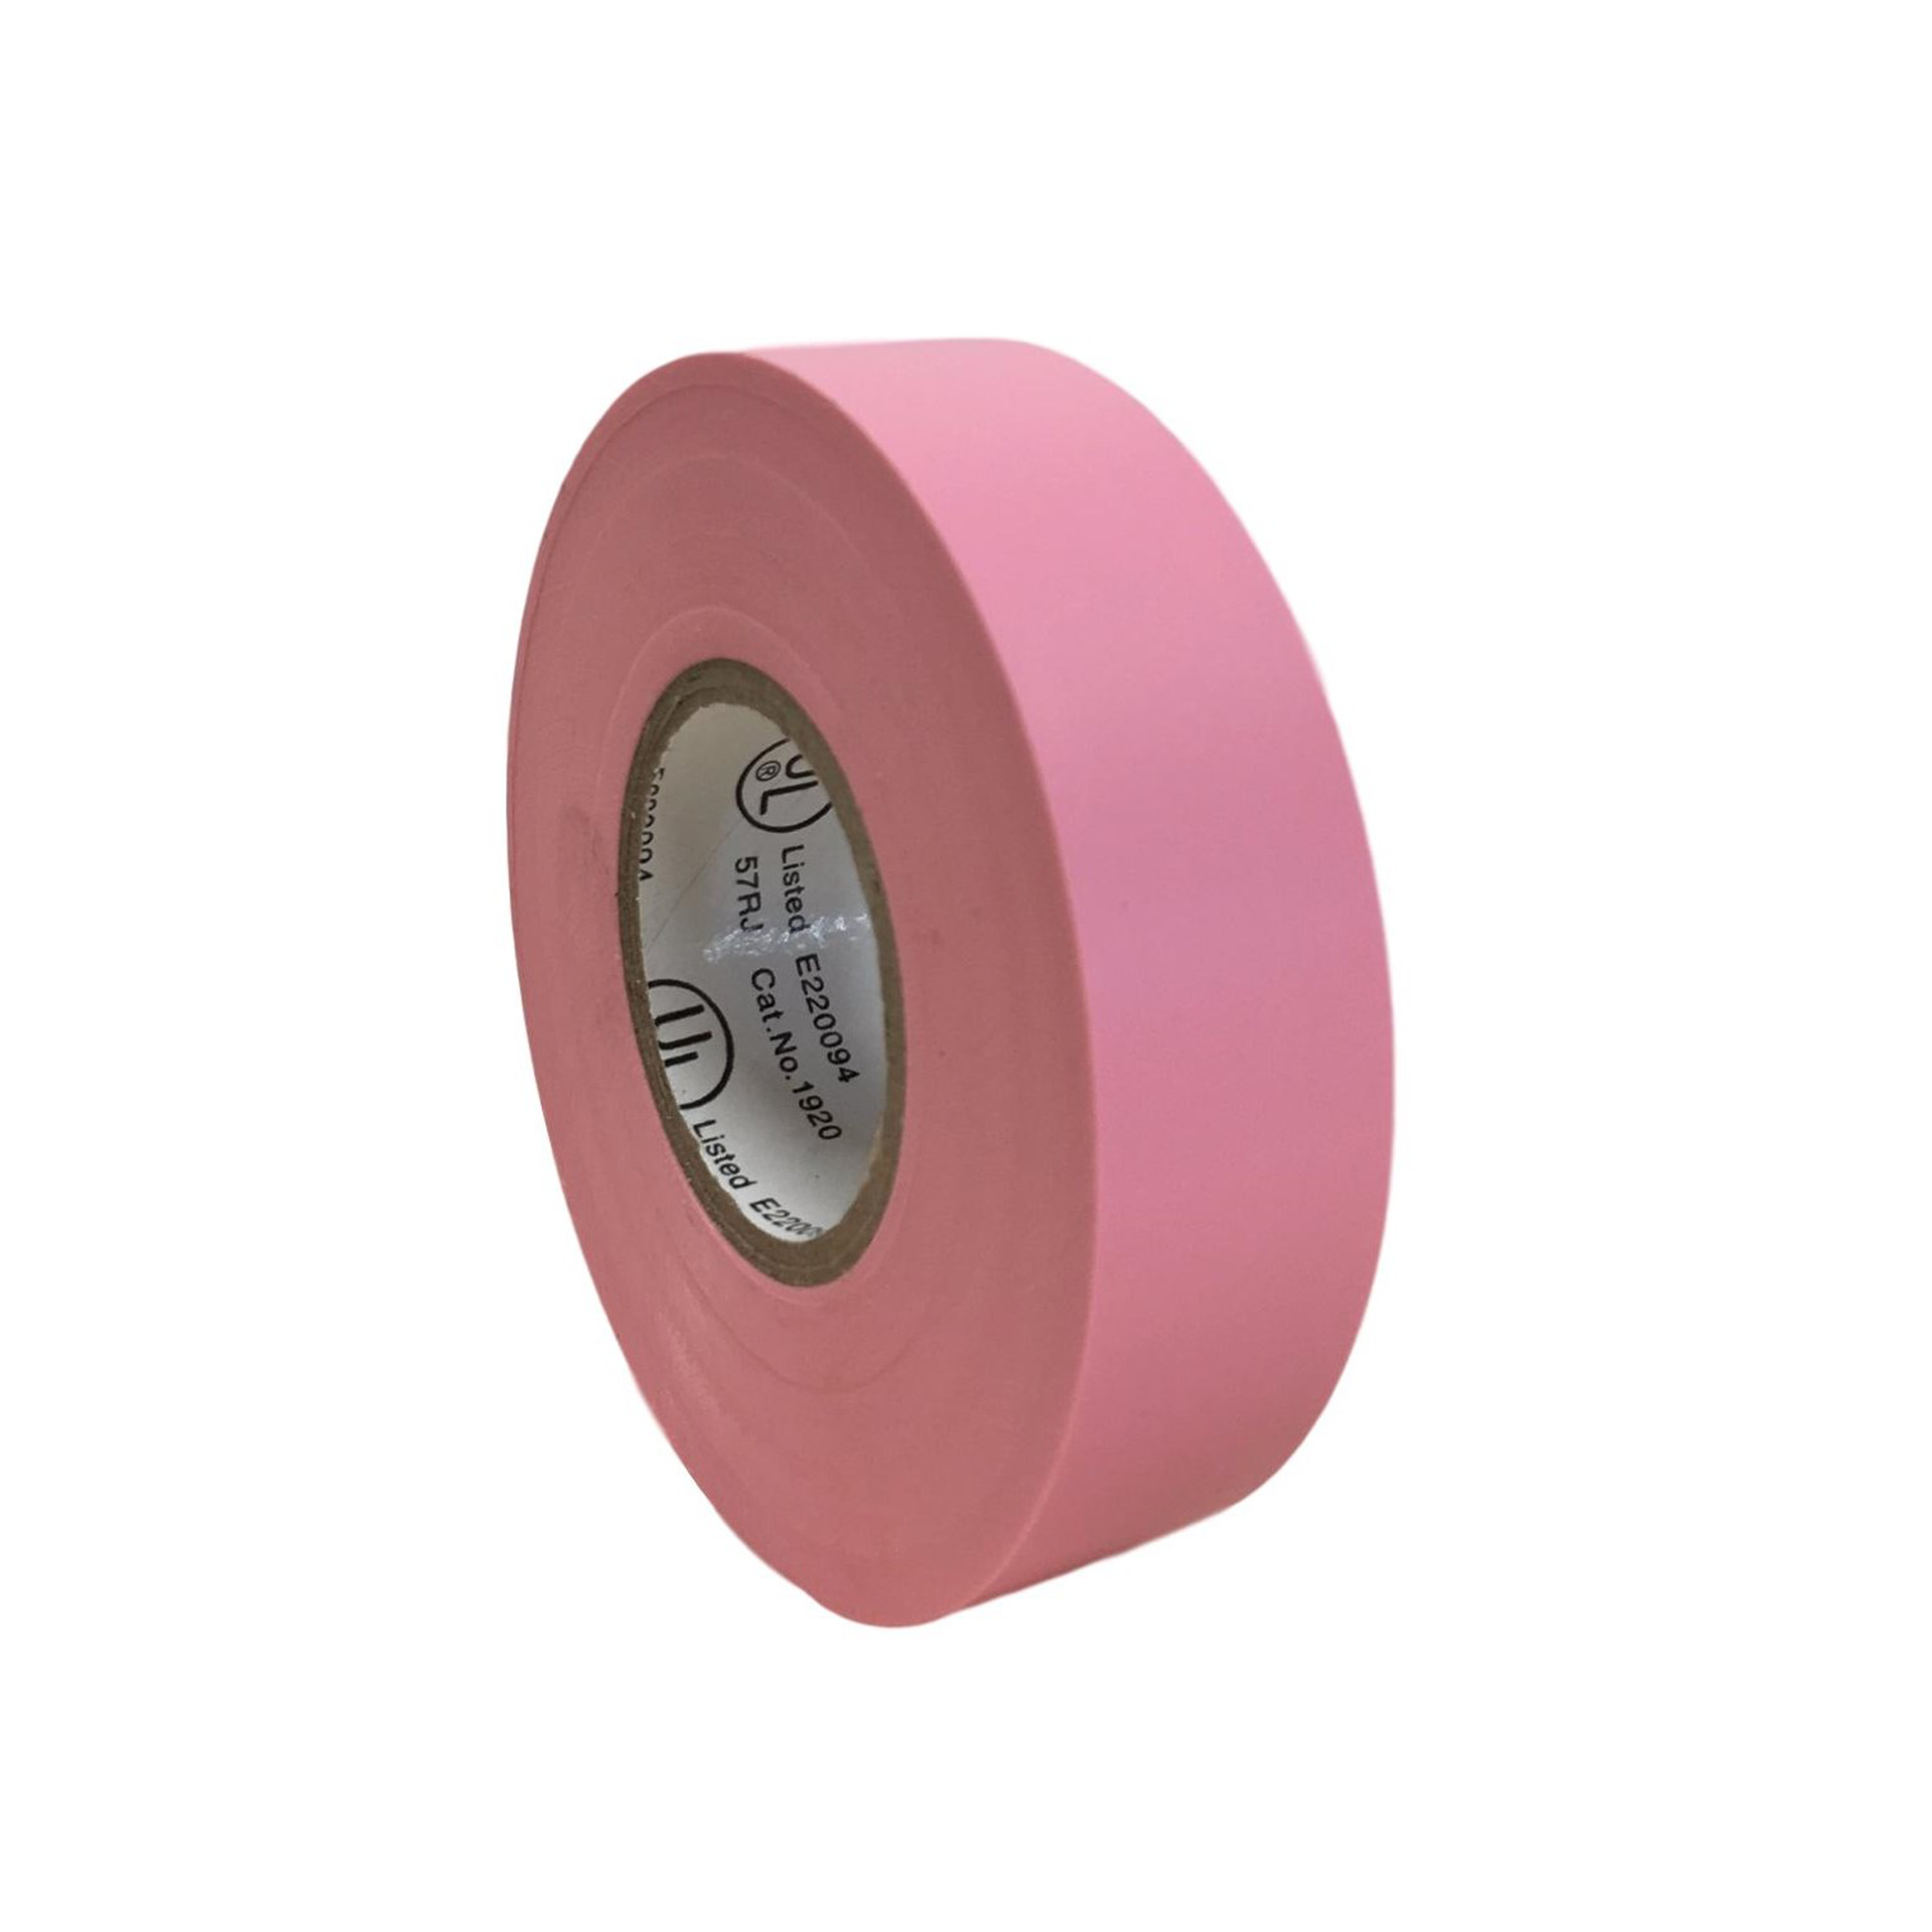 TradeGear Electrical Tape (10pk) Pink Matte - Waterproof, Flame Retardant, Strong Rubber Based Adhesive, UL Listed - Rated for M